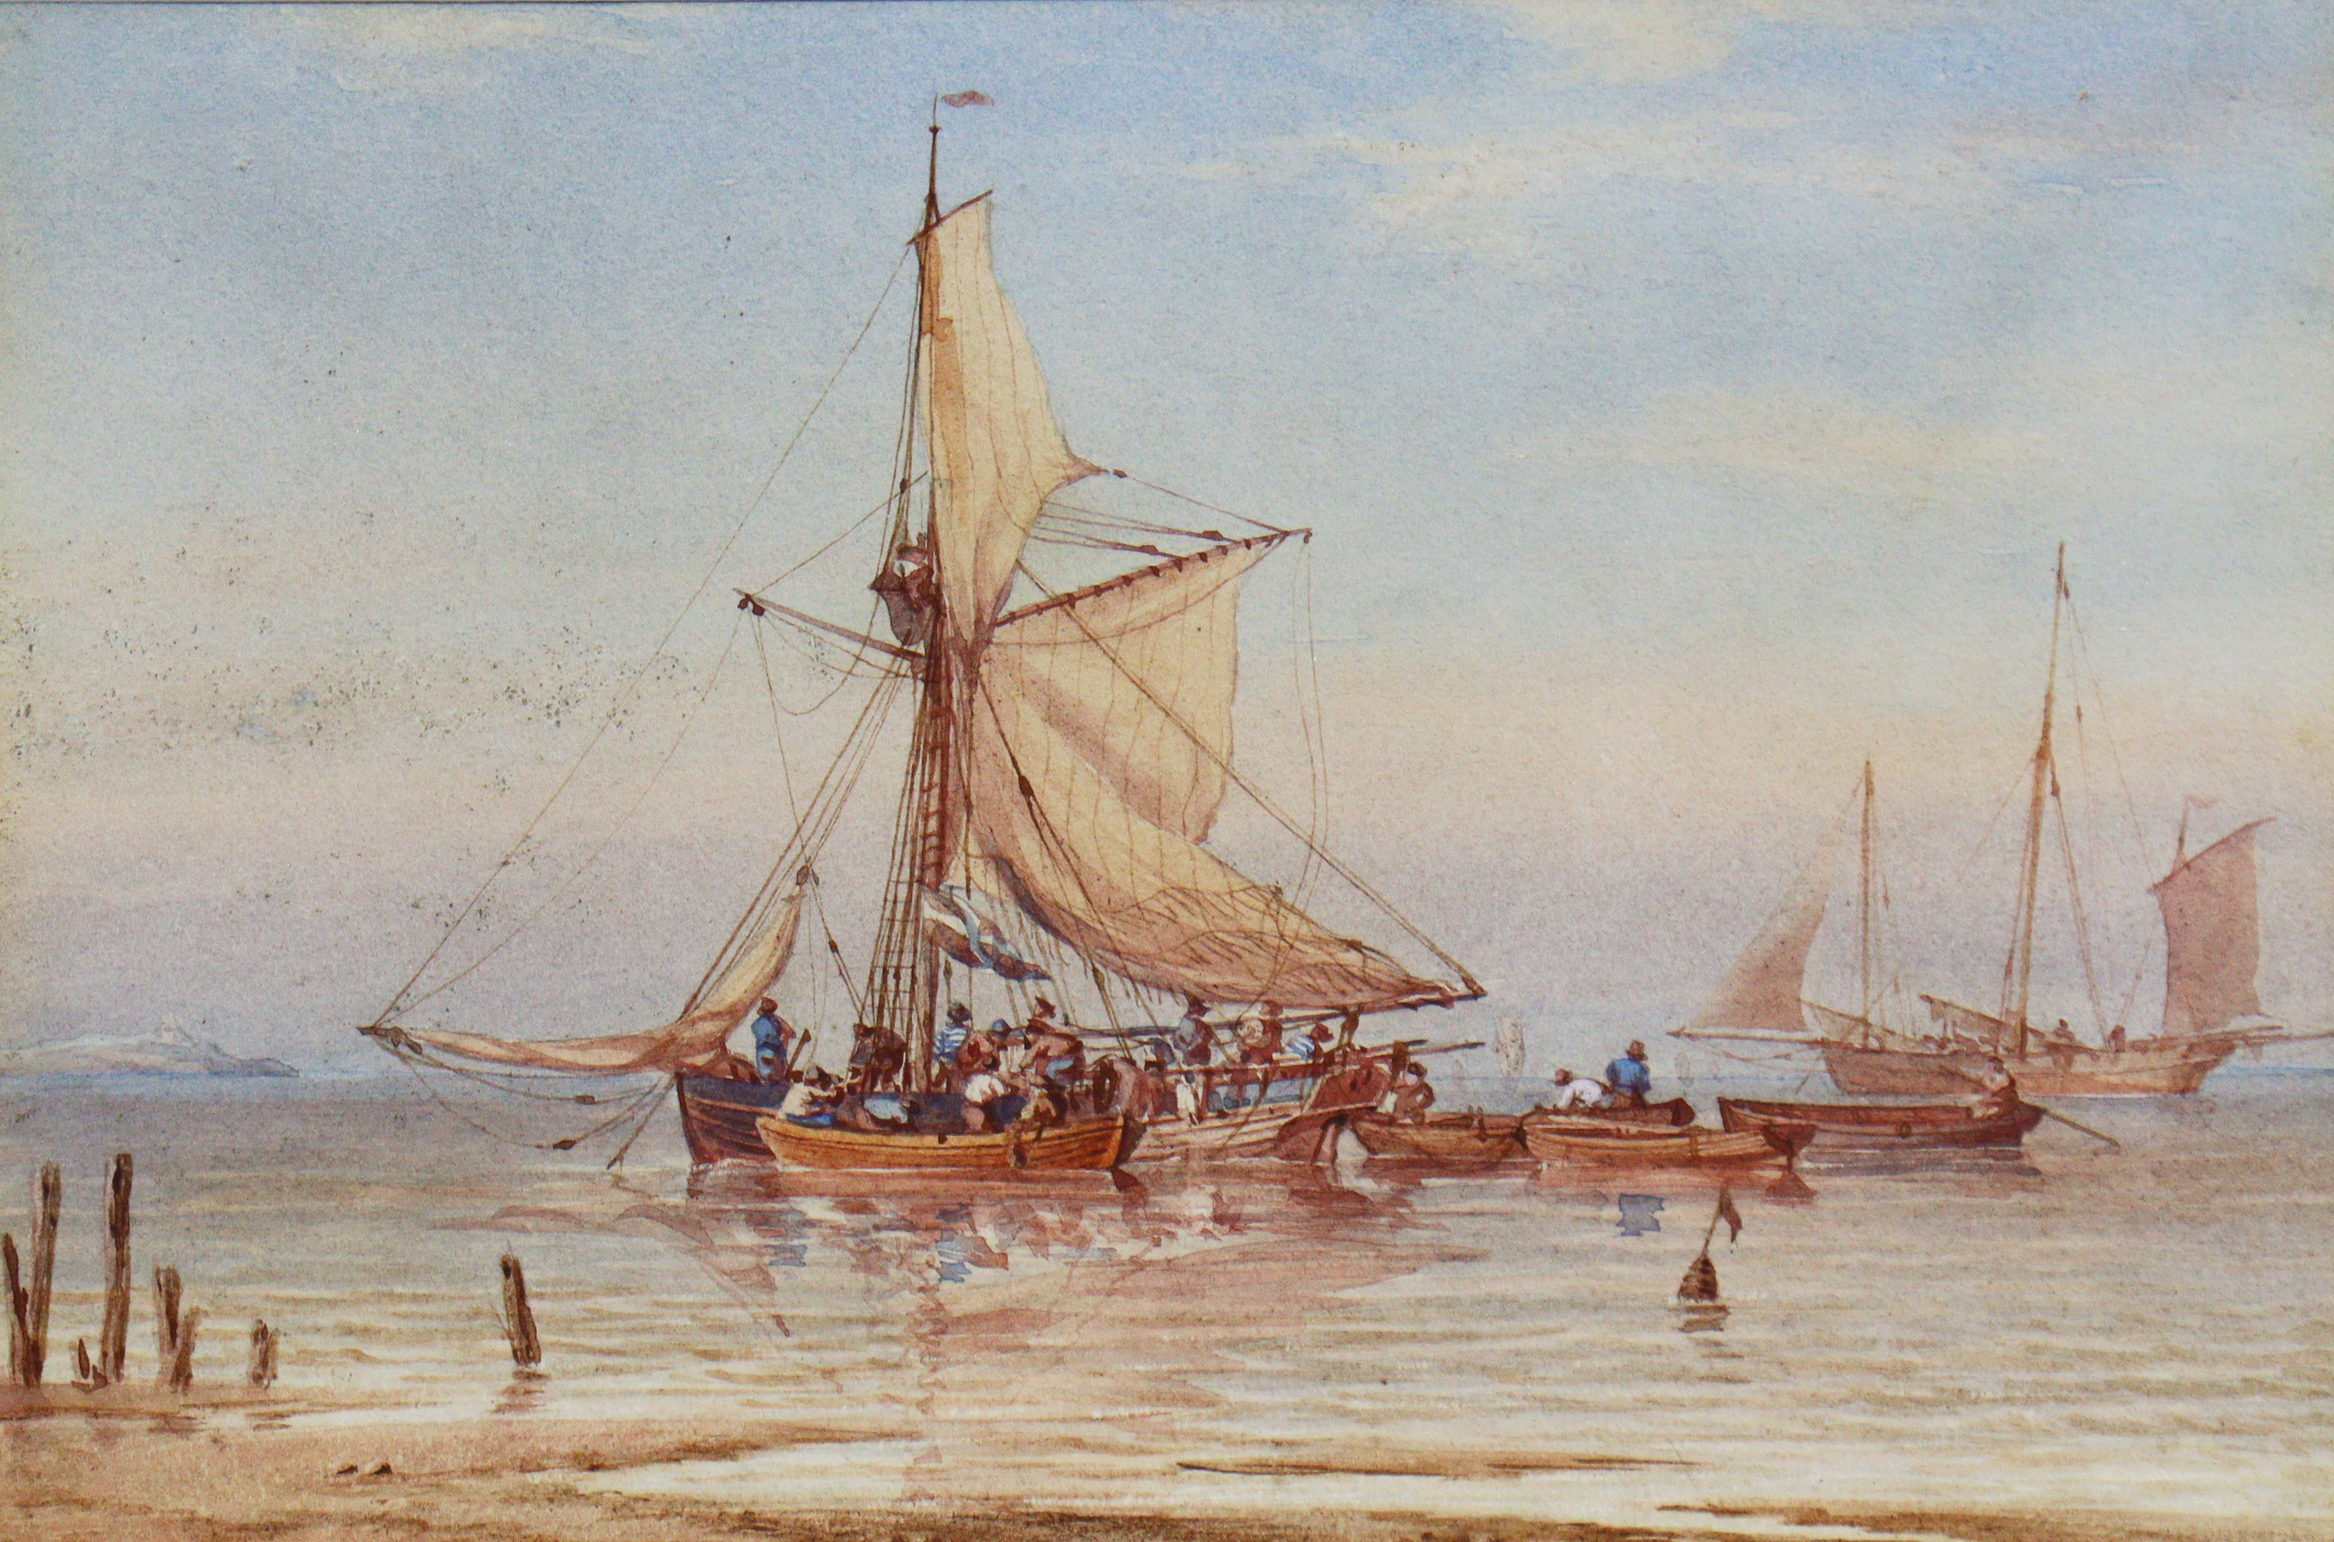 Attributed to WILLIAM JOY (1803-1867) and JOHN CANTILOE JOY (1806-1866). Fishing vessels off the